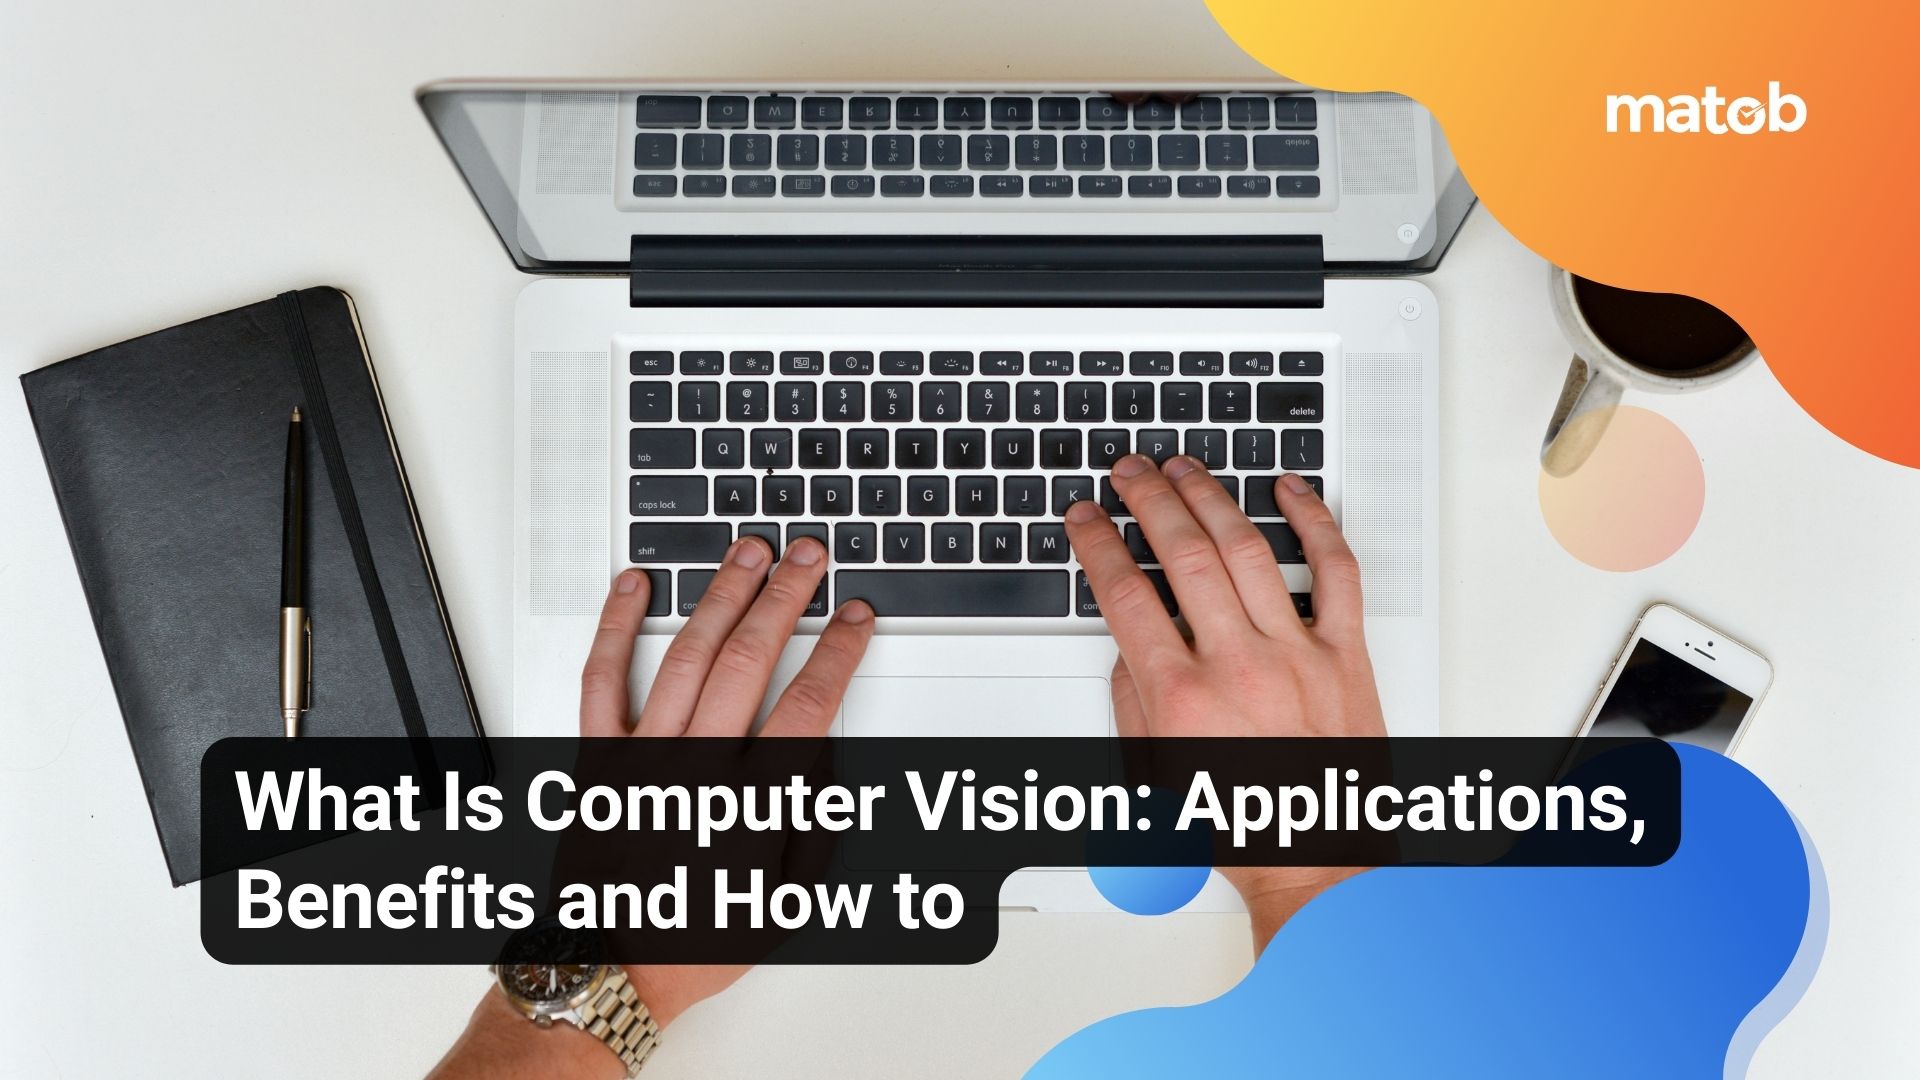 What Is Computer Vision: Applications, Benefits and How to